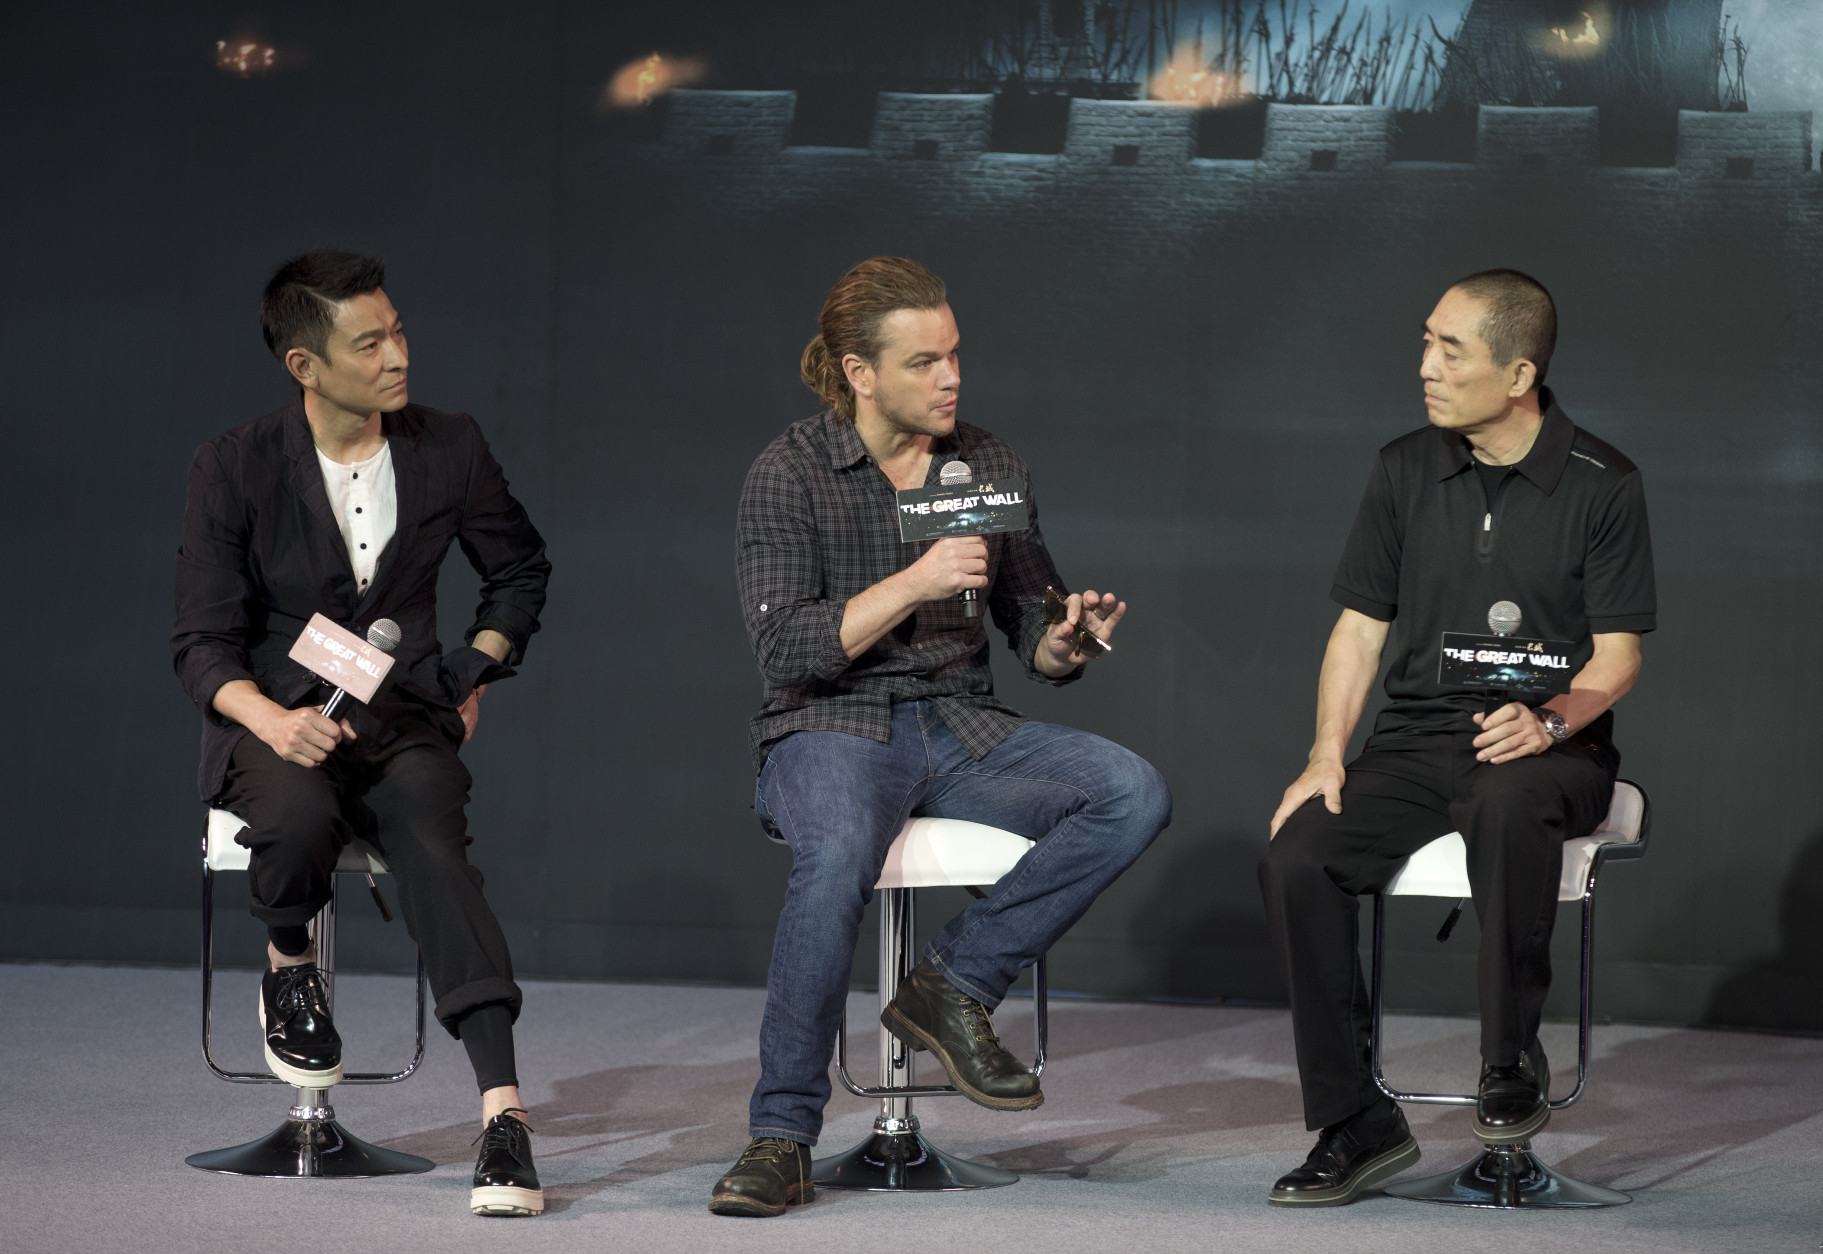 Actor Matt Damon, center, speaks next to Hong Kong movie star Andy Lau, left, and director Zhang Yimou, right, during a press conference of their latest movie The Great Wall held at a hotel in Beijing, China, Thursday, July 2, 2015. Zhang Yimou says that the Sino-U.S. fantasy adventure movie set around the building of the Great Wall and starring Matt Damon combines a Chinese land and story with Hollywood monsters.  (AP Photo/Andy Wong)